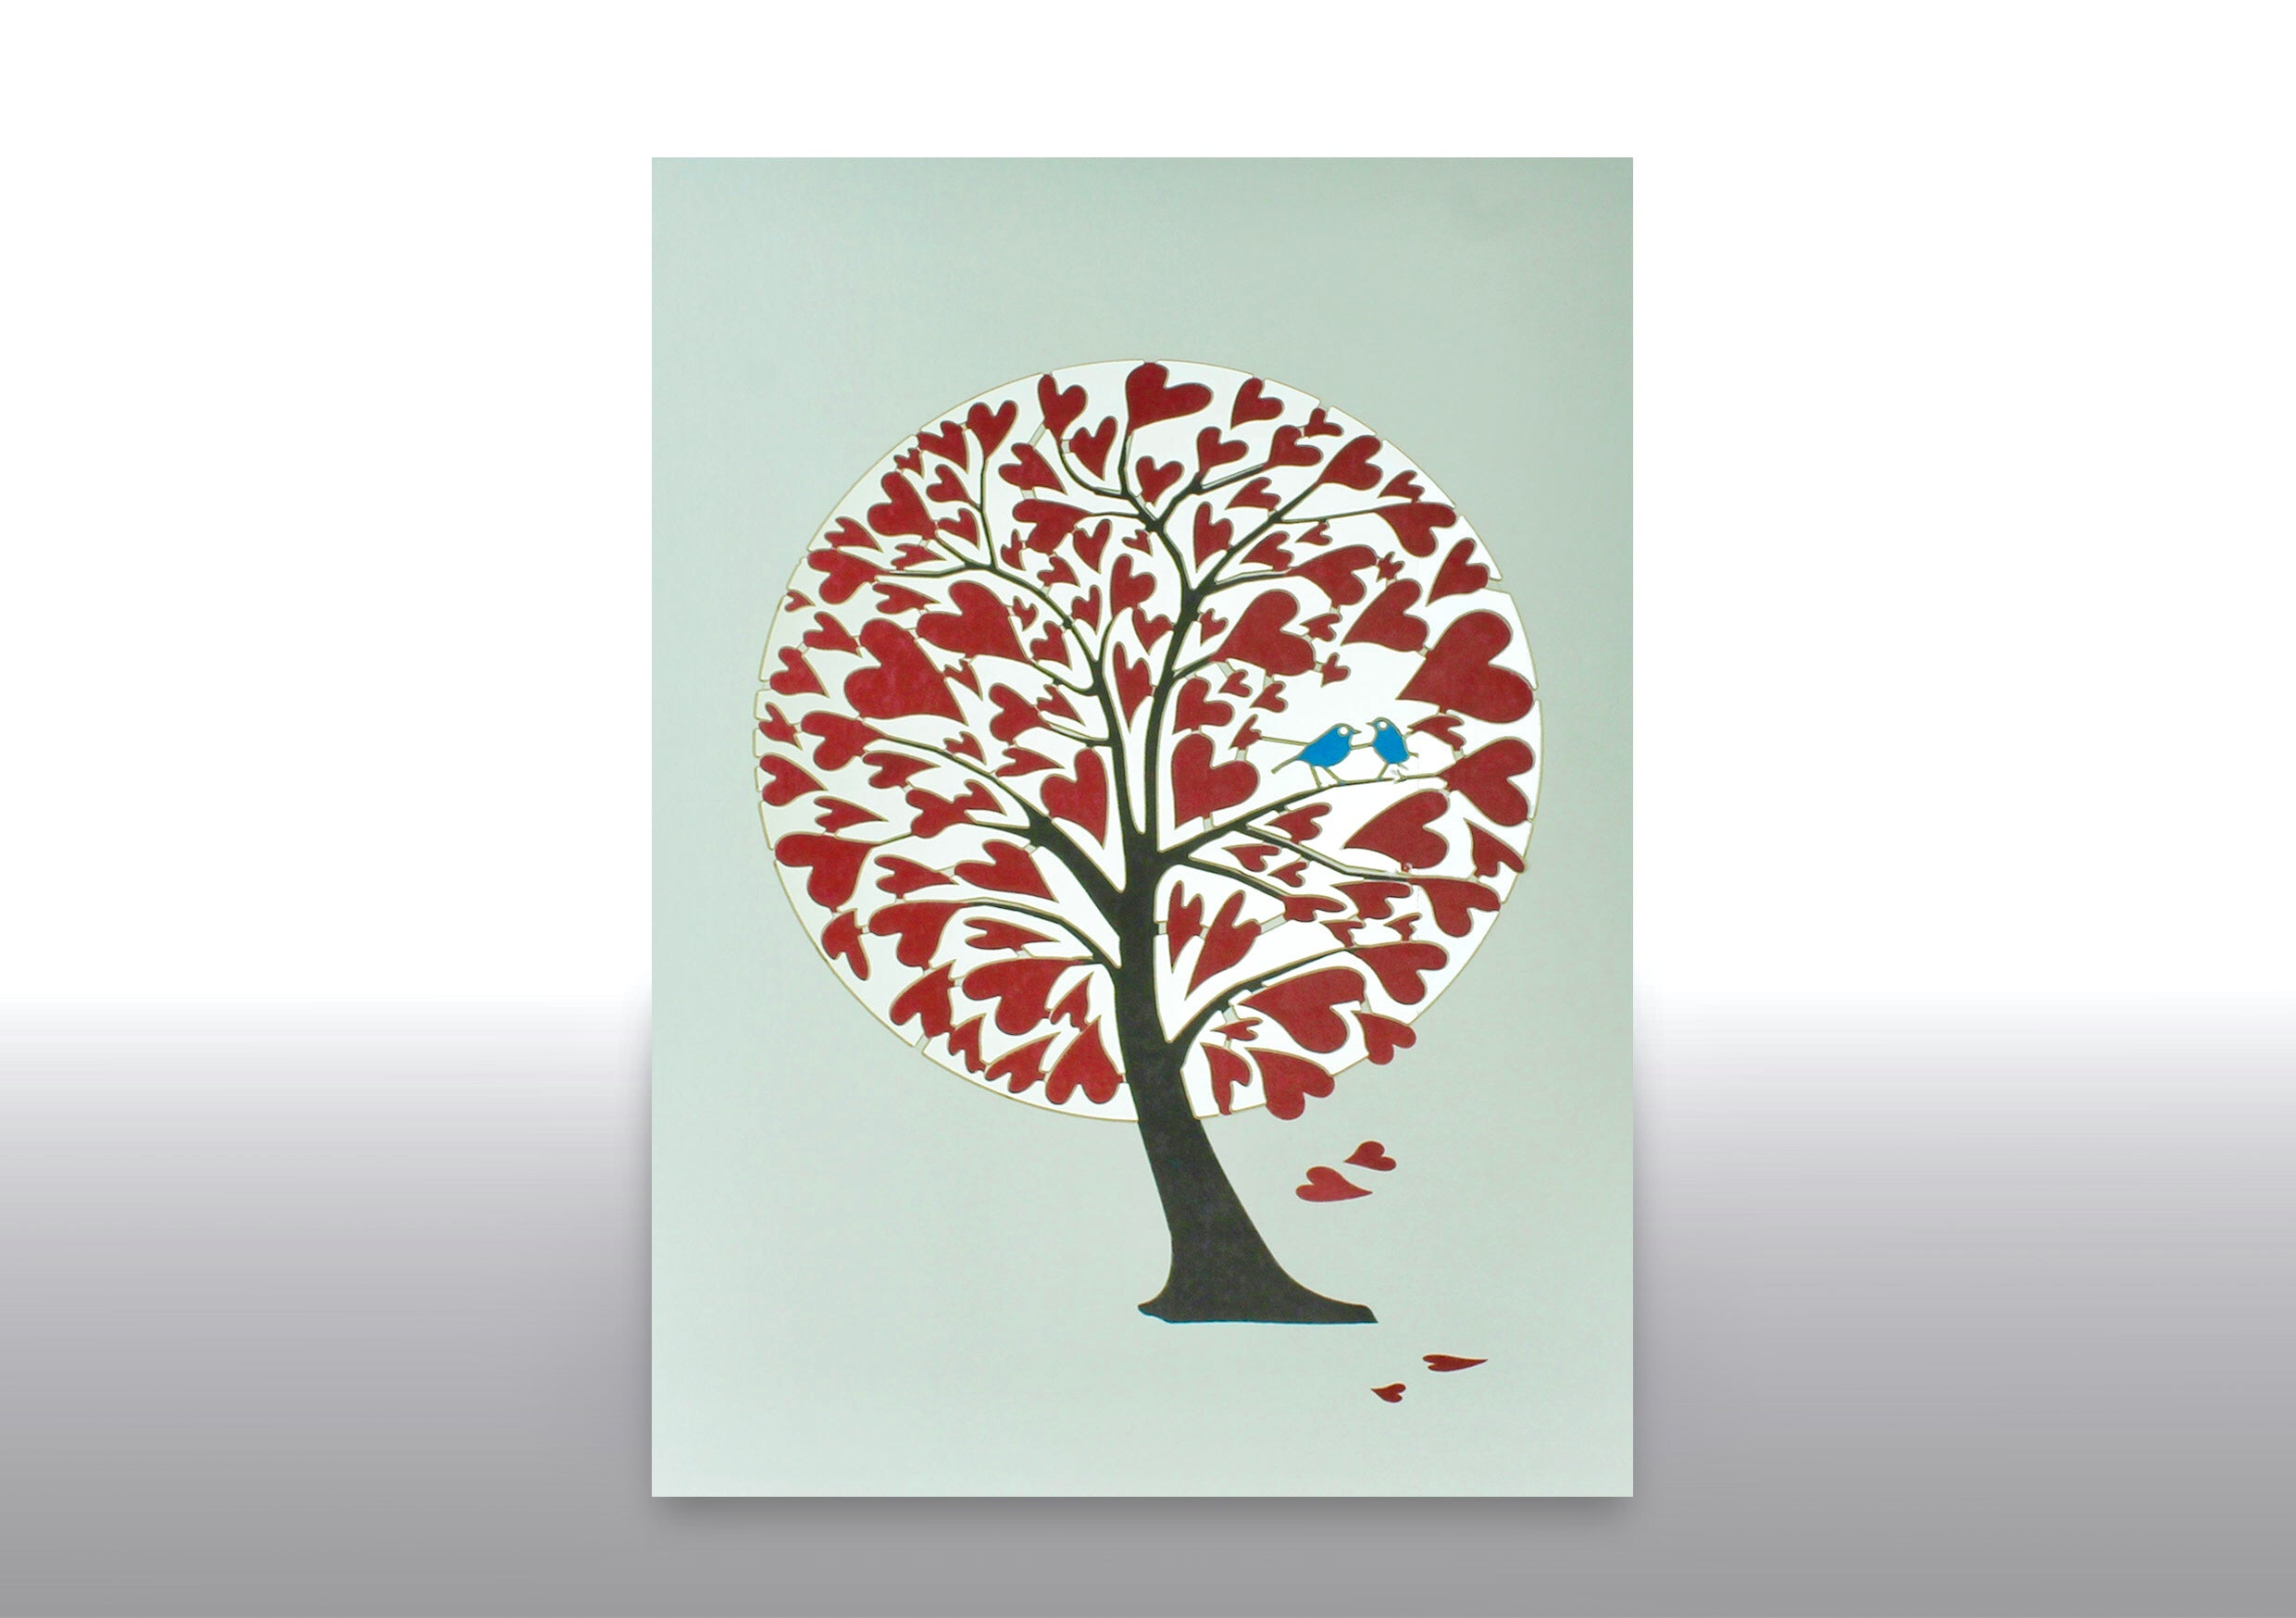 Valentines Red Heart Tree of Love 3D Cut Out Wedding Anniversary Birthday Greeting Card